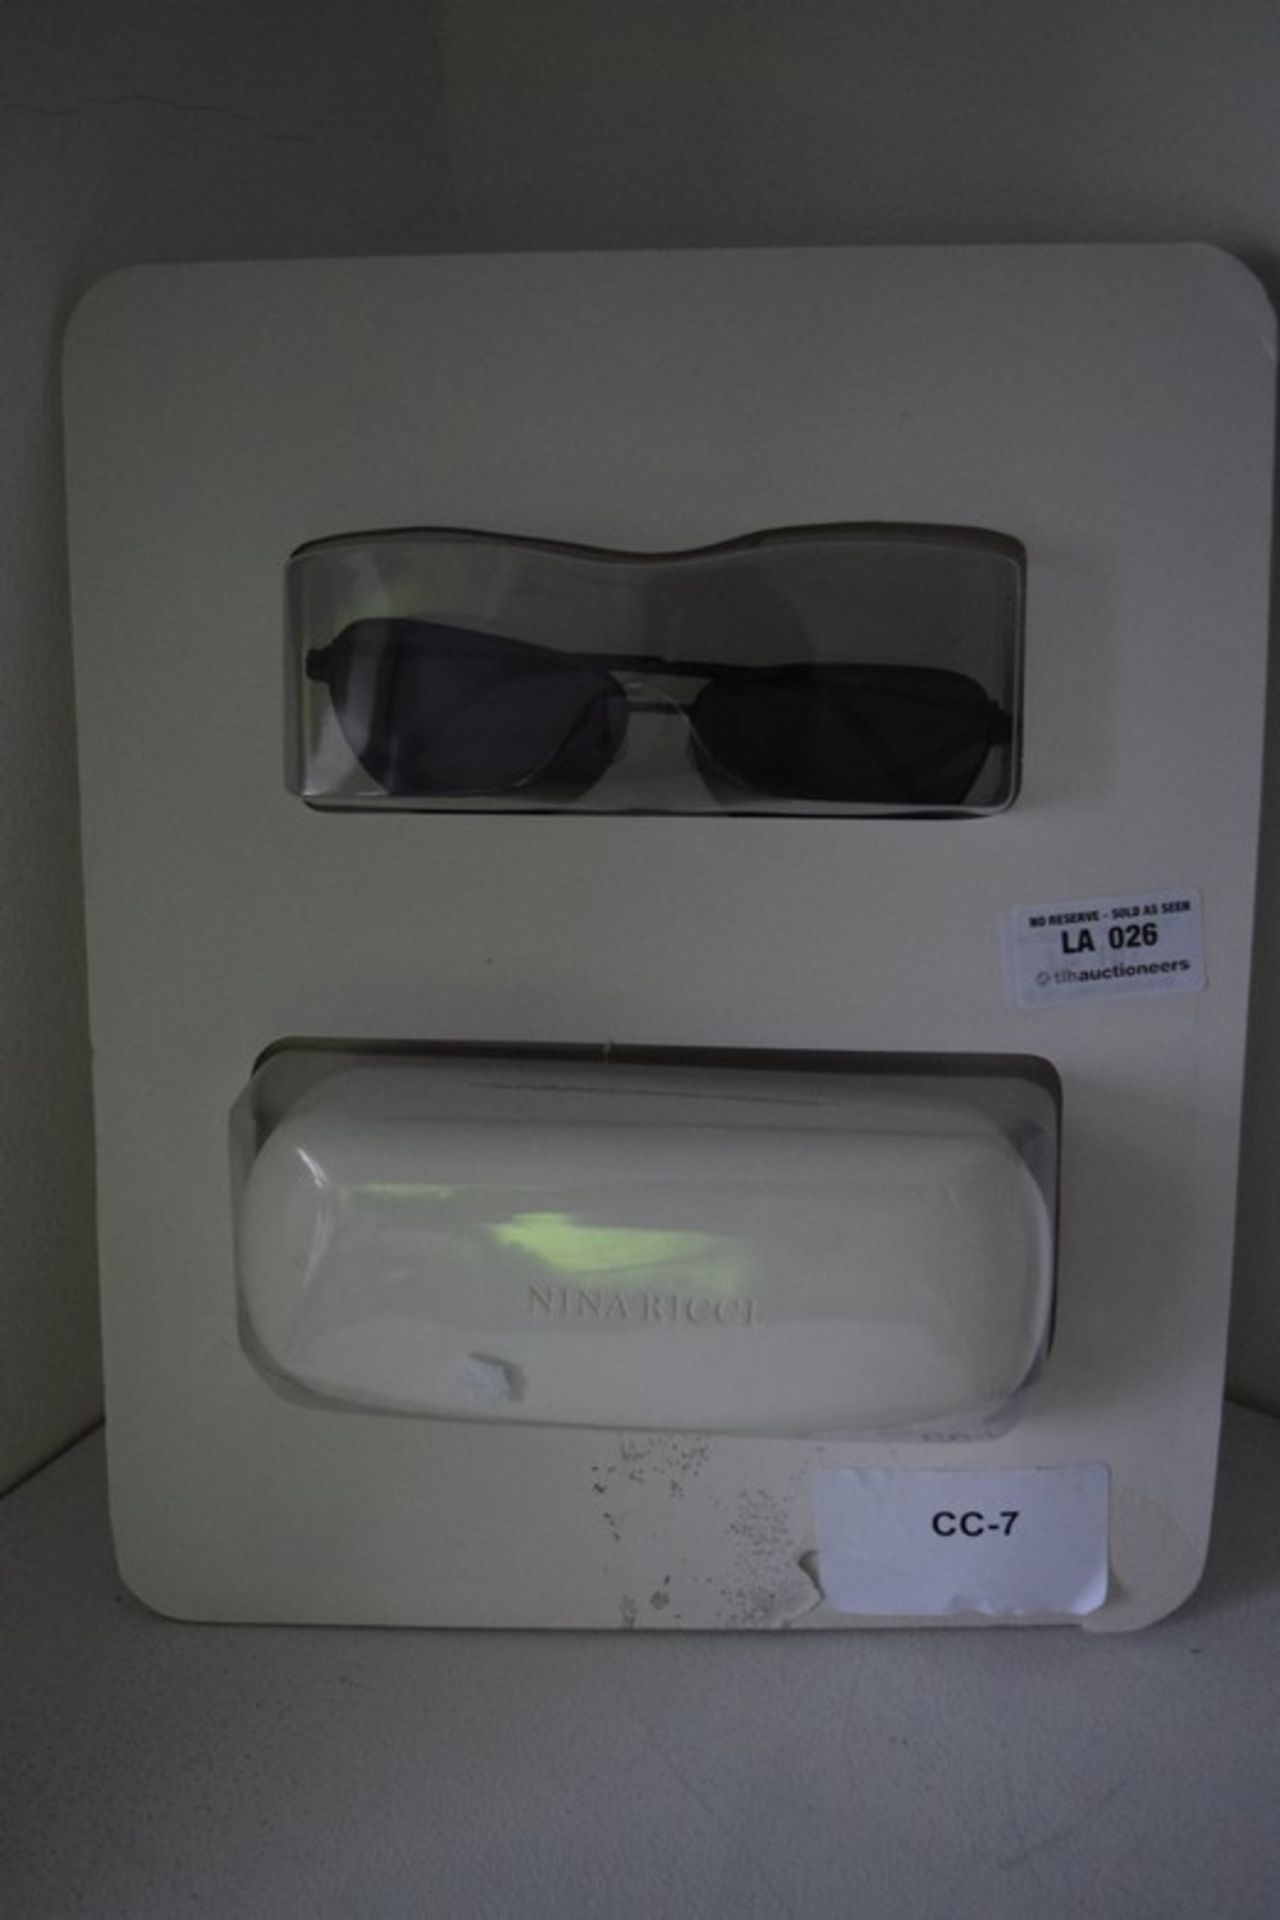 1 x PAIR NINA RICCI DESIGNER SUNGLASSES RRP £80 *PLEASE NOTE THAT THE BID PRICE IS MULTIPLIED BY THE